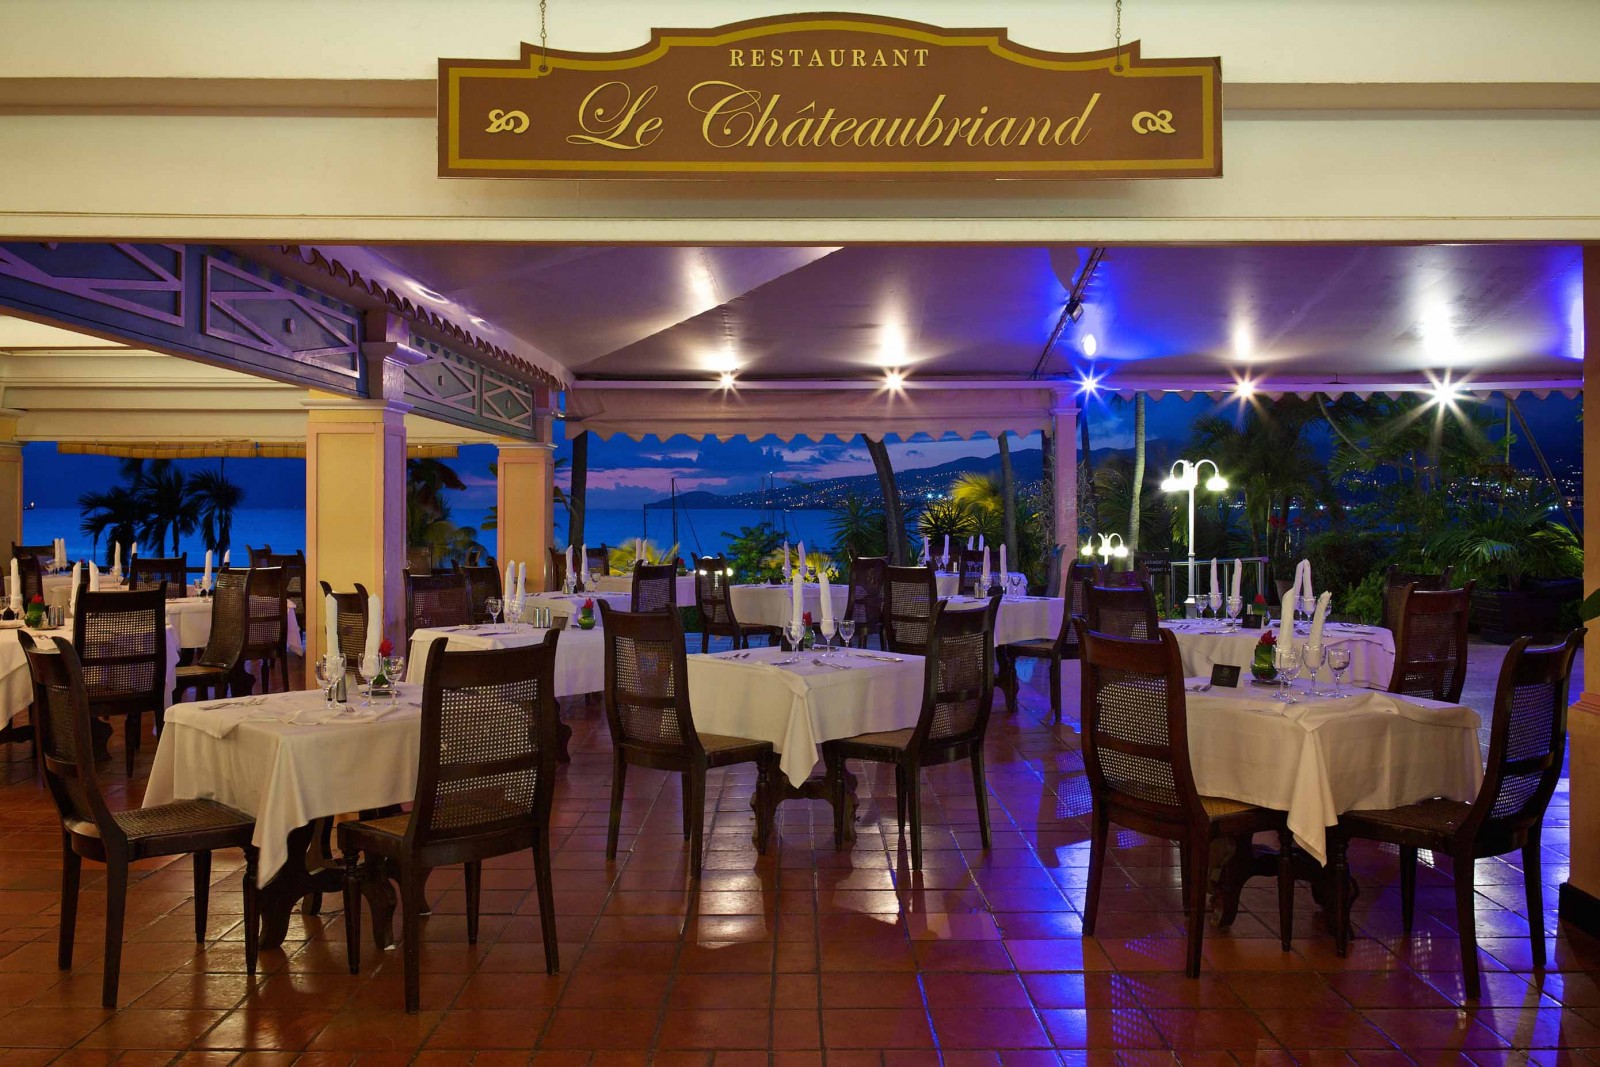 Le Chateaubriand, refined cuisine